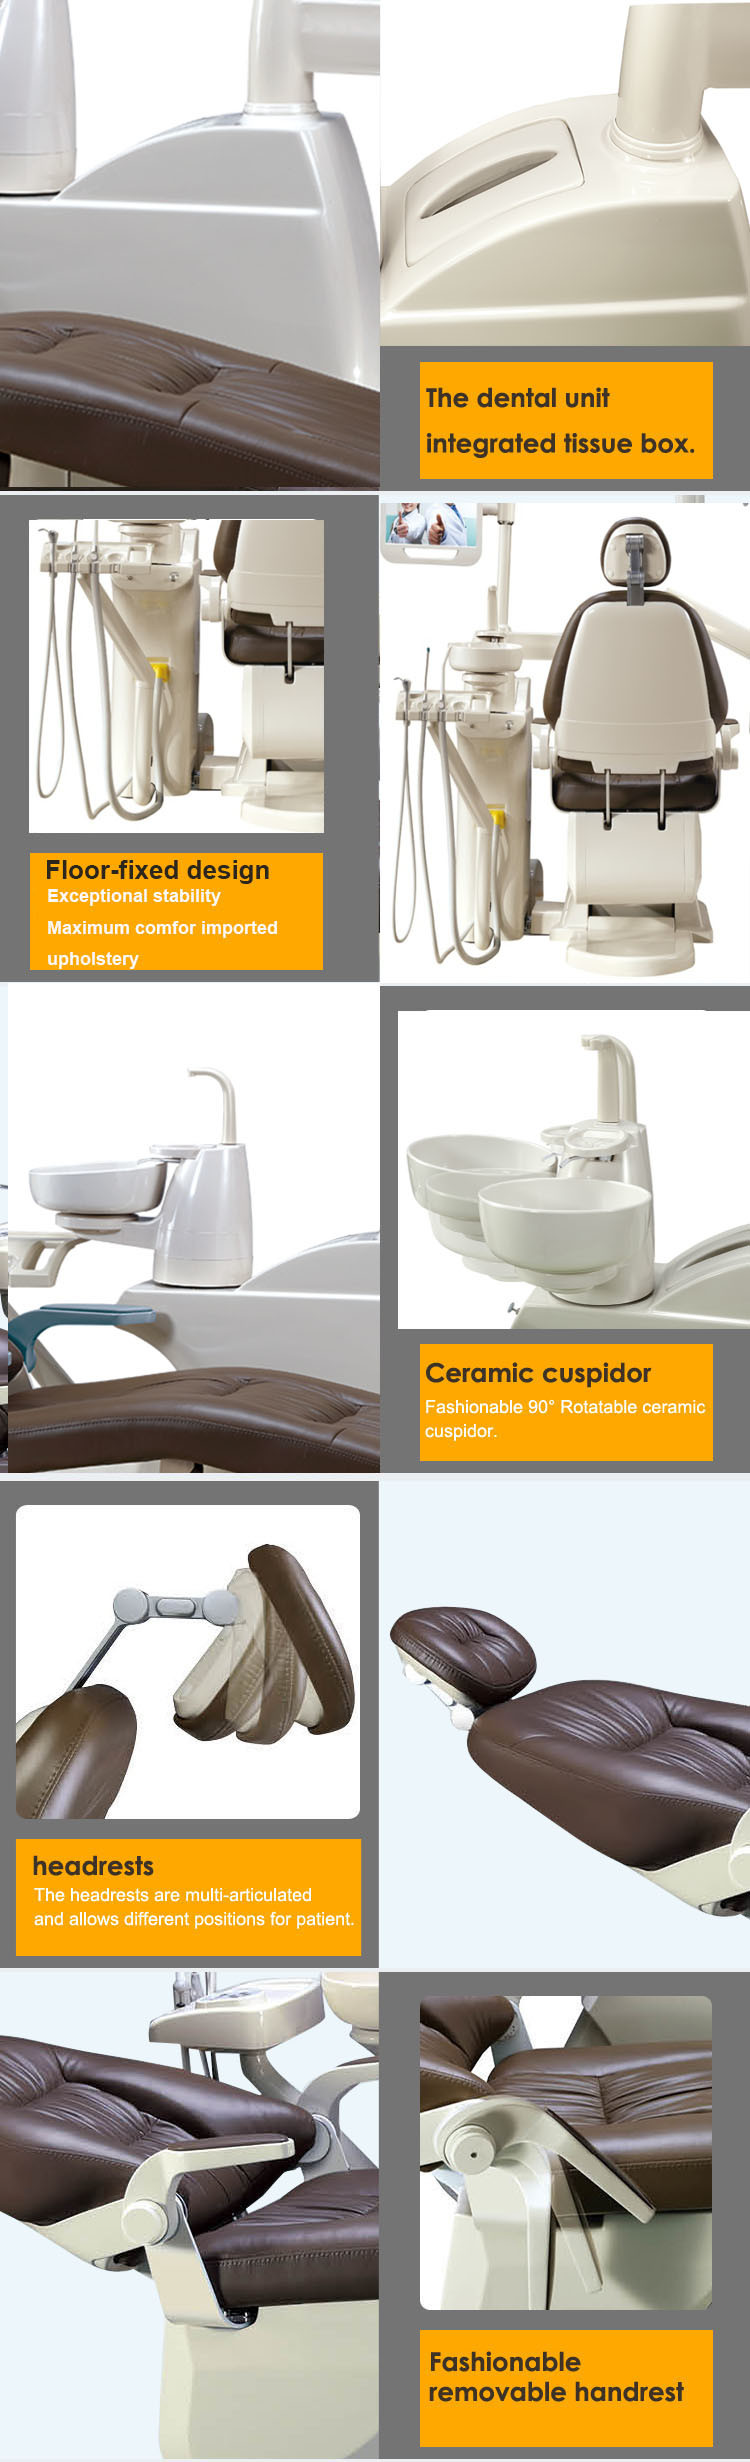 Luxurious Type Imported Upholstery Floor-Fixed China Dental Equipment Unit, Medical Equipment Suppliers